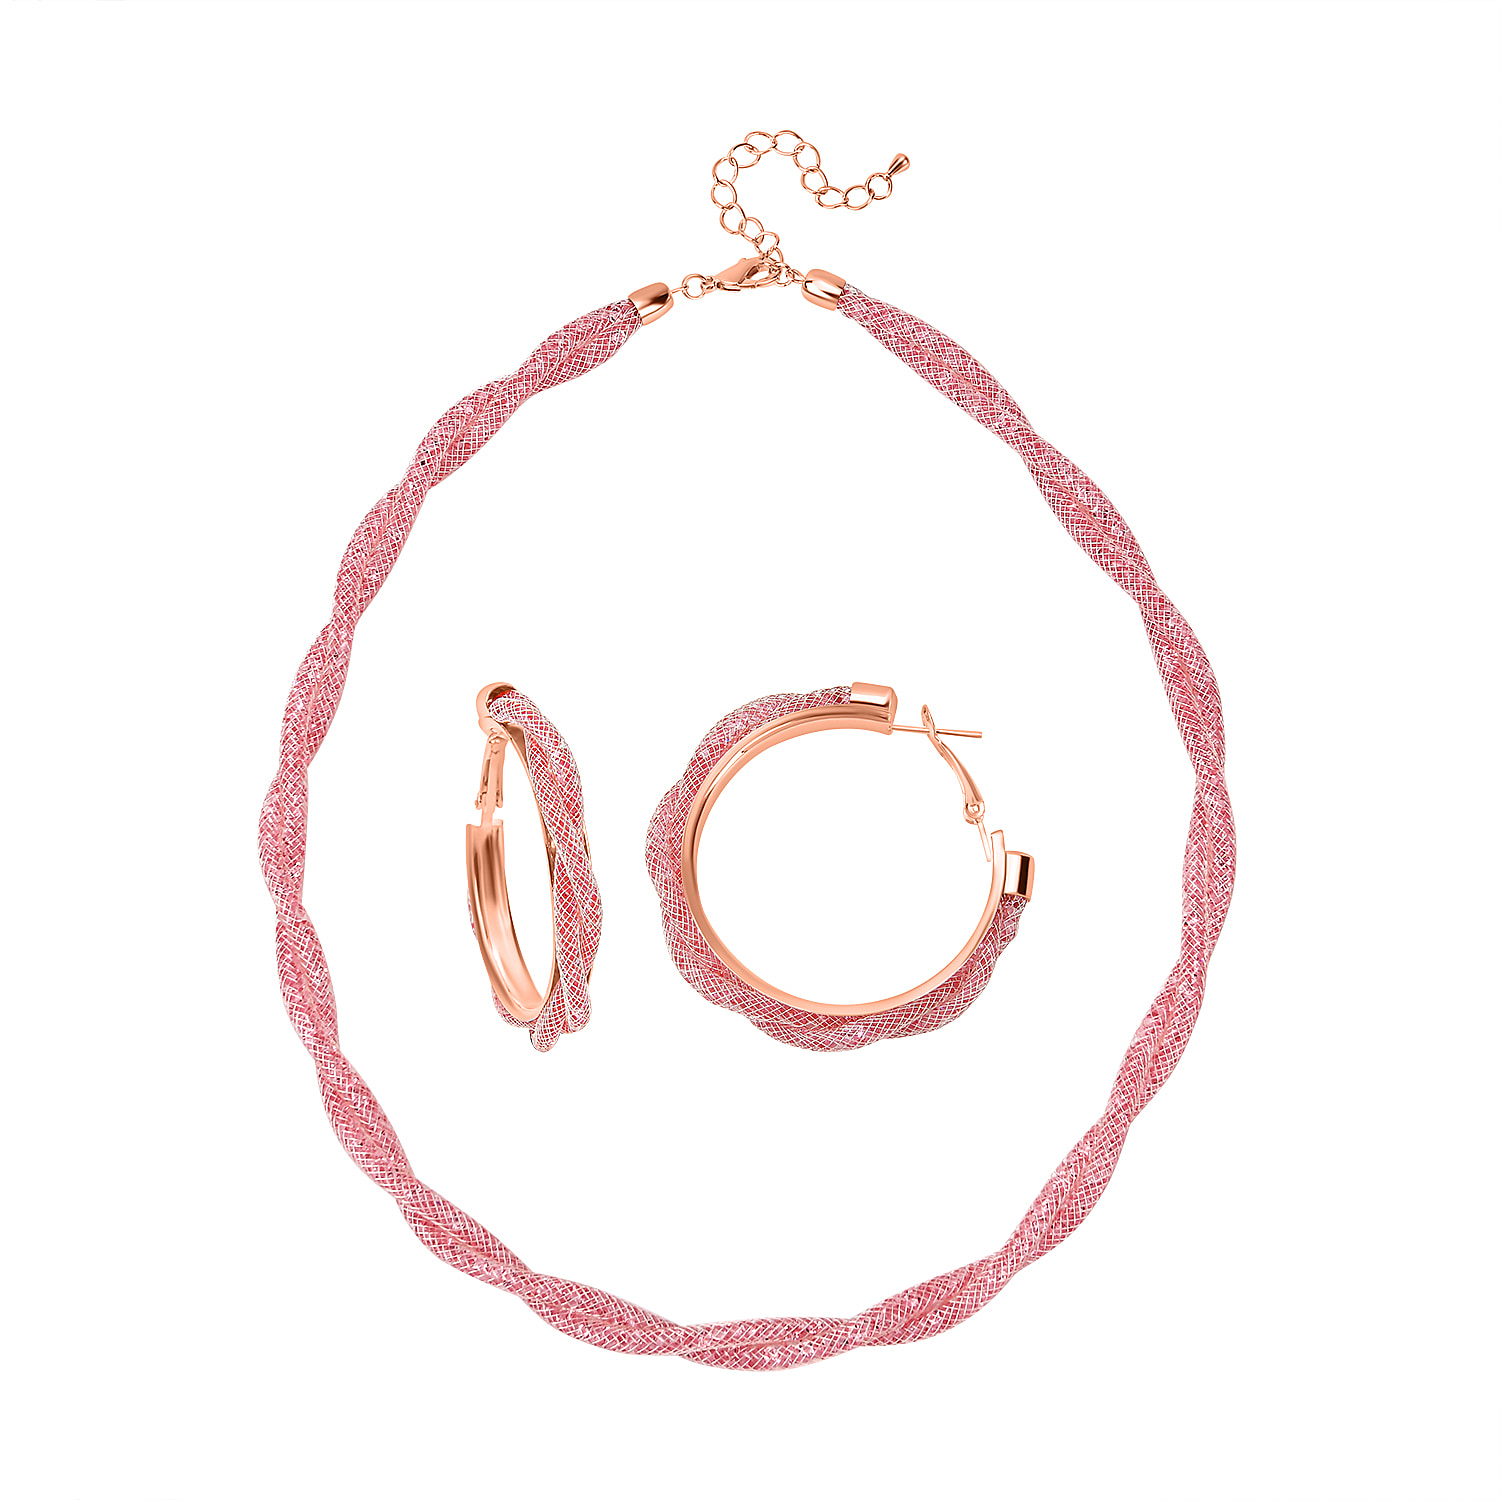 One Time Closeout- 2 Piece Set - Pink Austrian Tuscan Crochet Hoop Earrings and Necklace (Size 20-2 Ext)